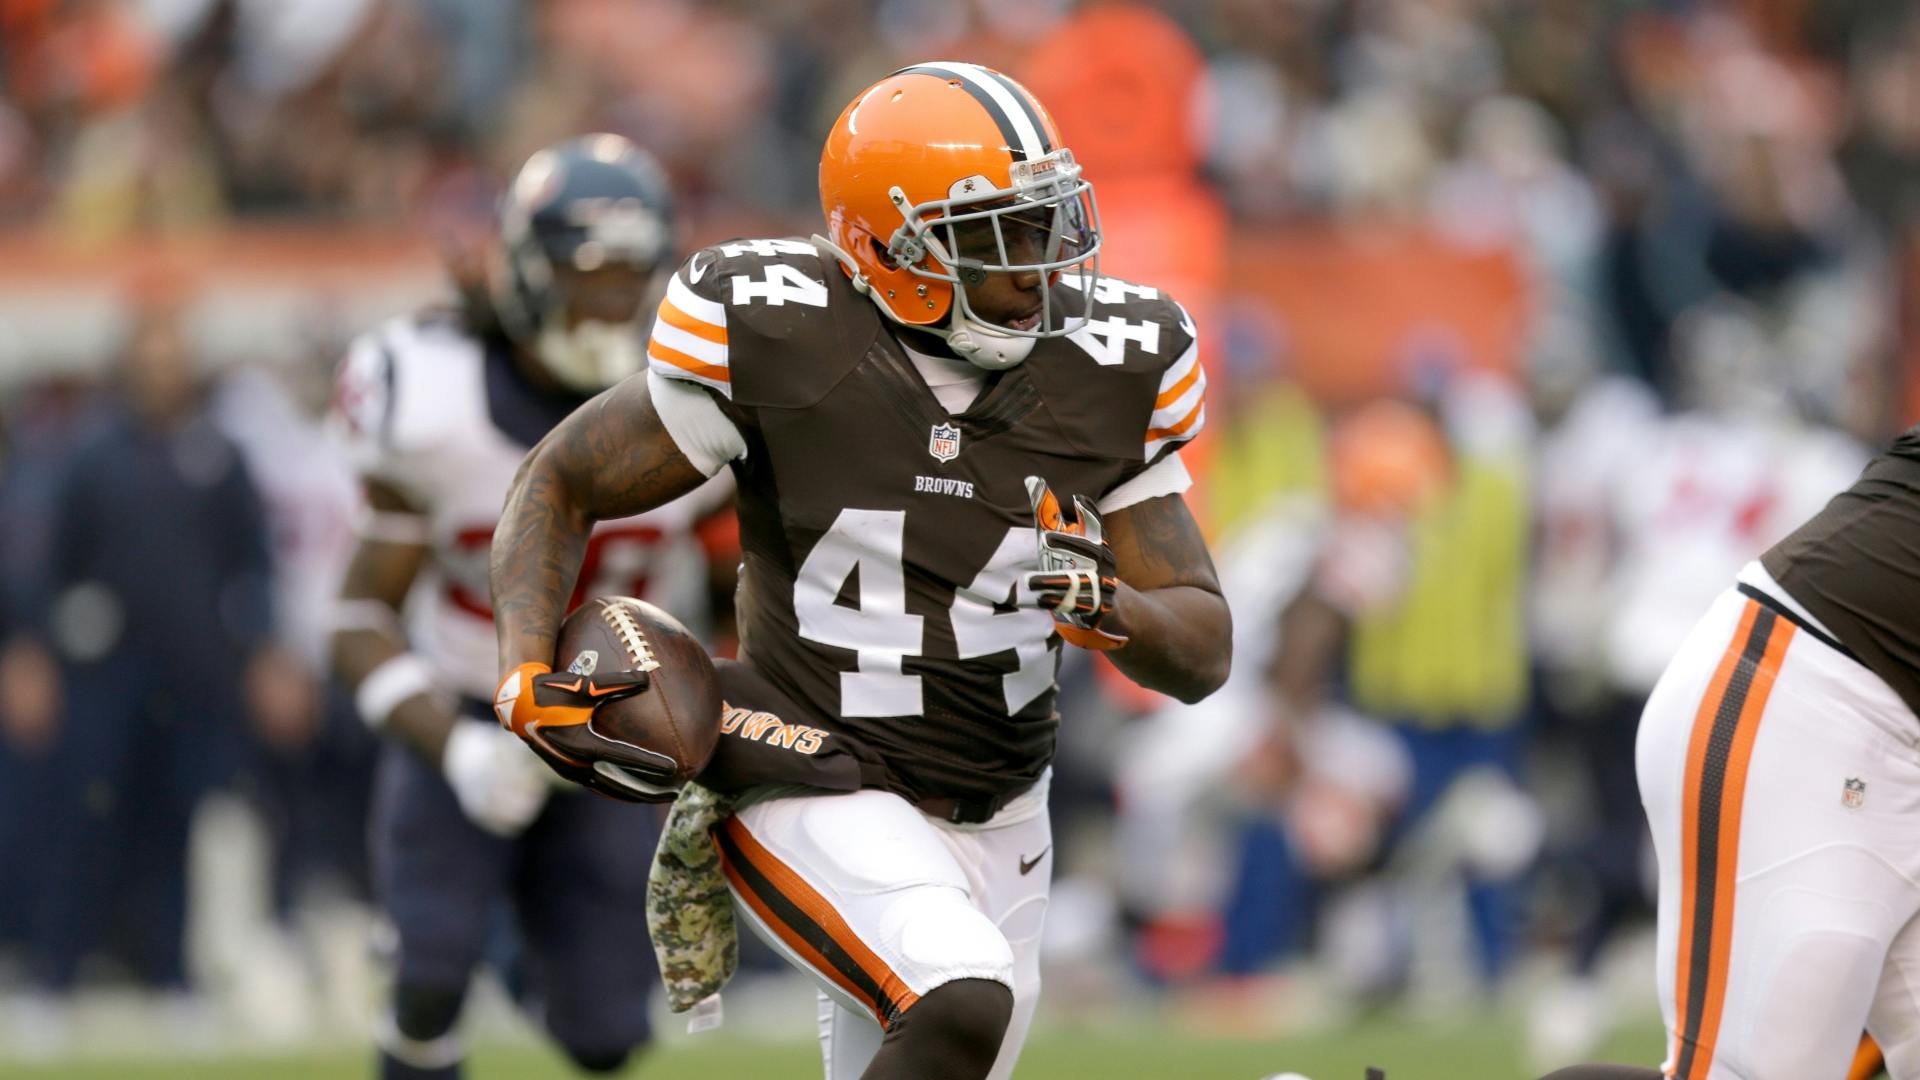 Running back Ben Tate was brought in by the Vikings to fill the void left by Adrian Peterson, who remains away from the team dealing with legal issues.